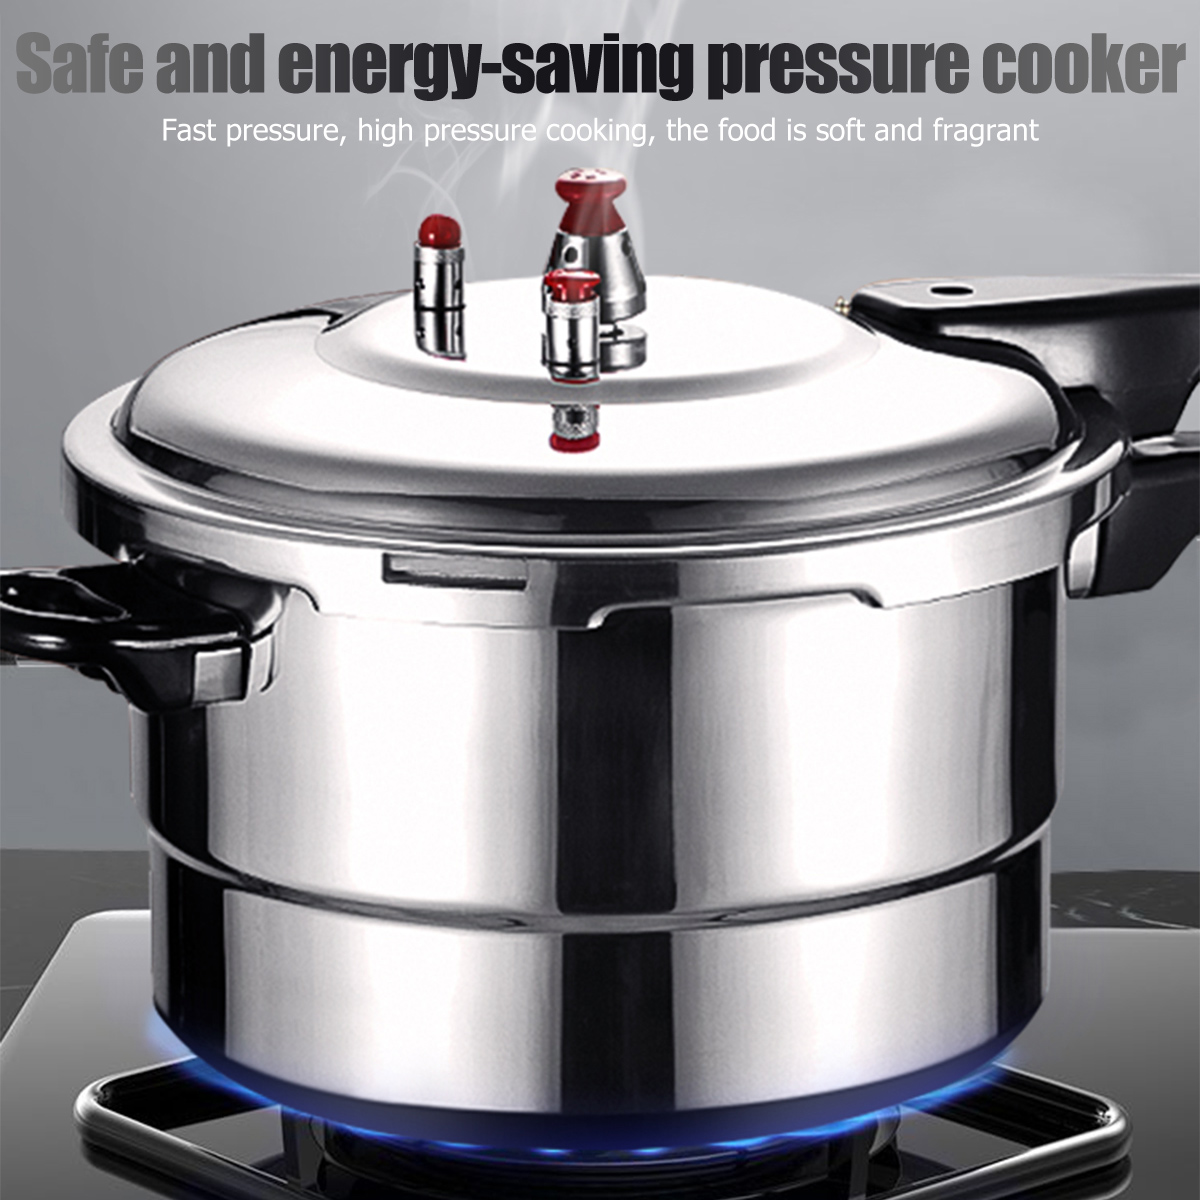 Minp Pressure Cooker, Aluminum Alloy, Compatible with All Heat Sources, Ultra High Pressure and Energy Saving, Time-Saving, Hot Cooking, Aluminum, 3